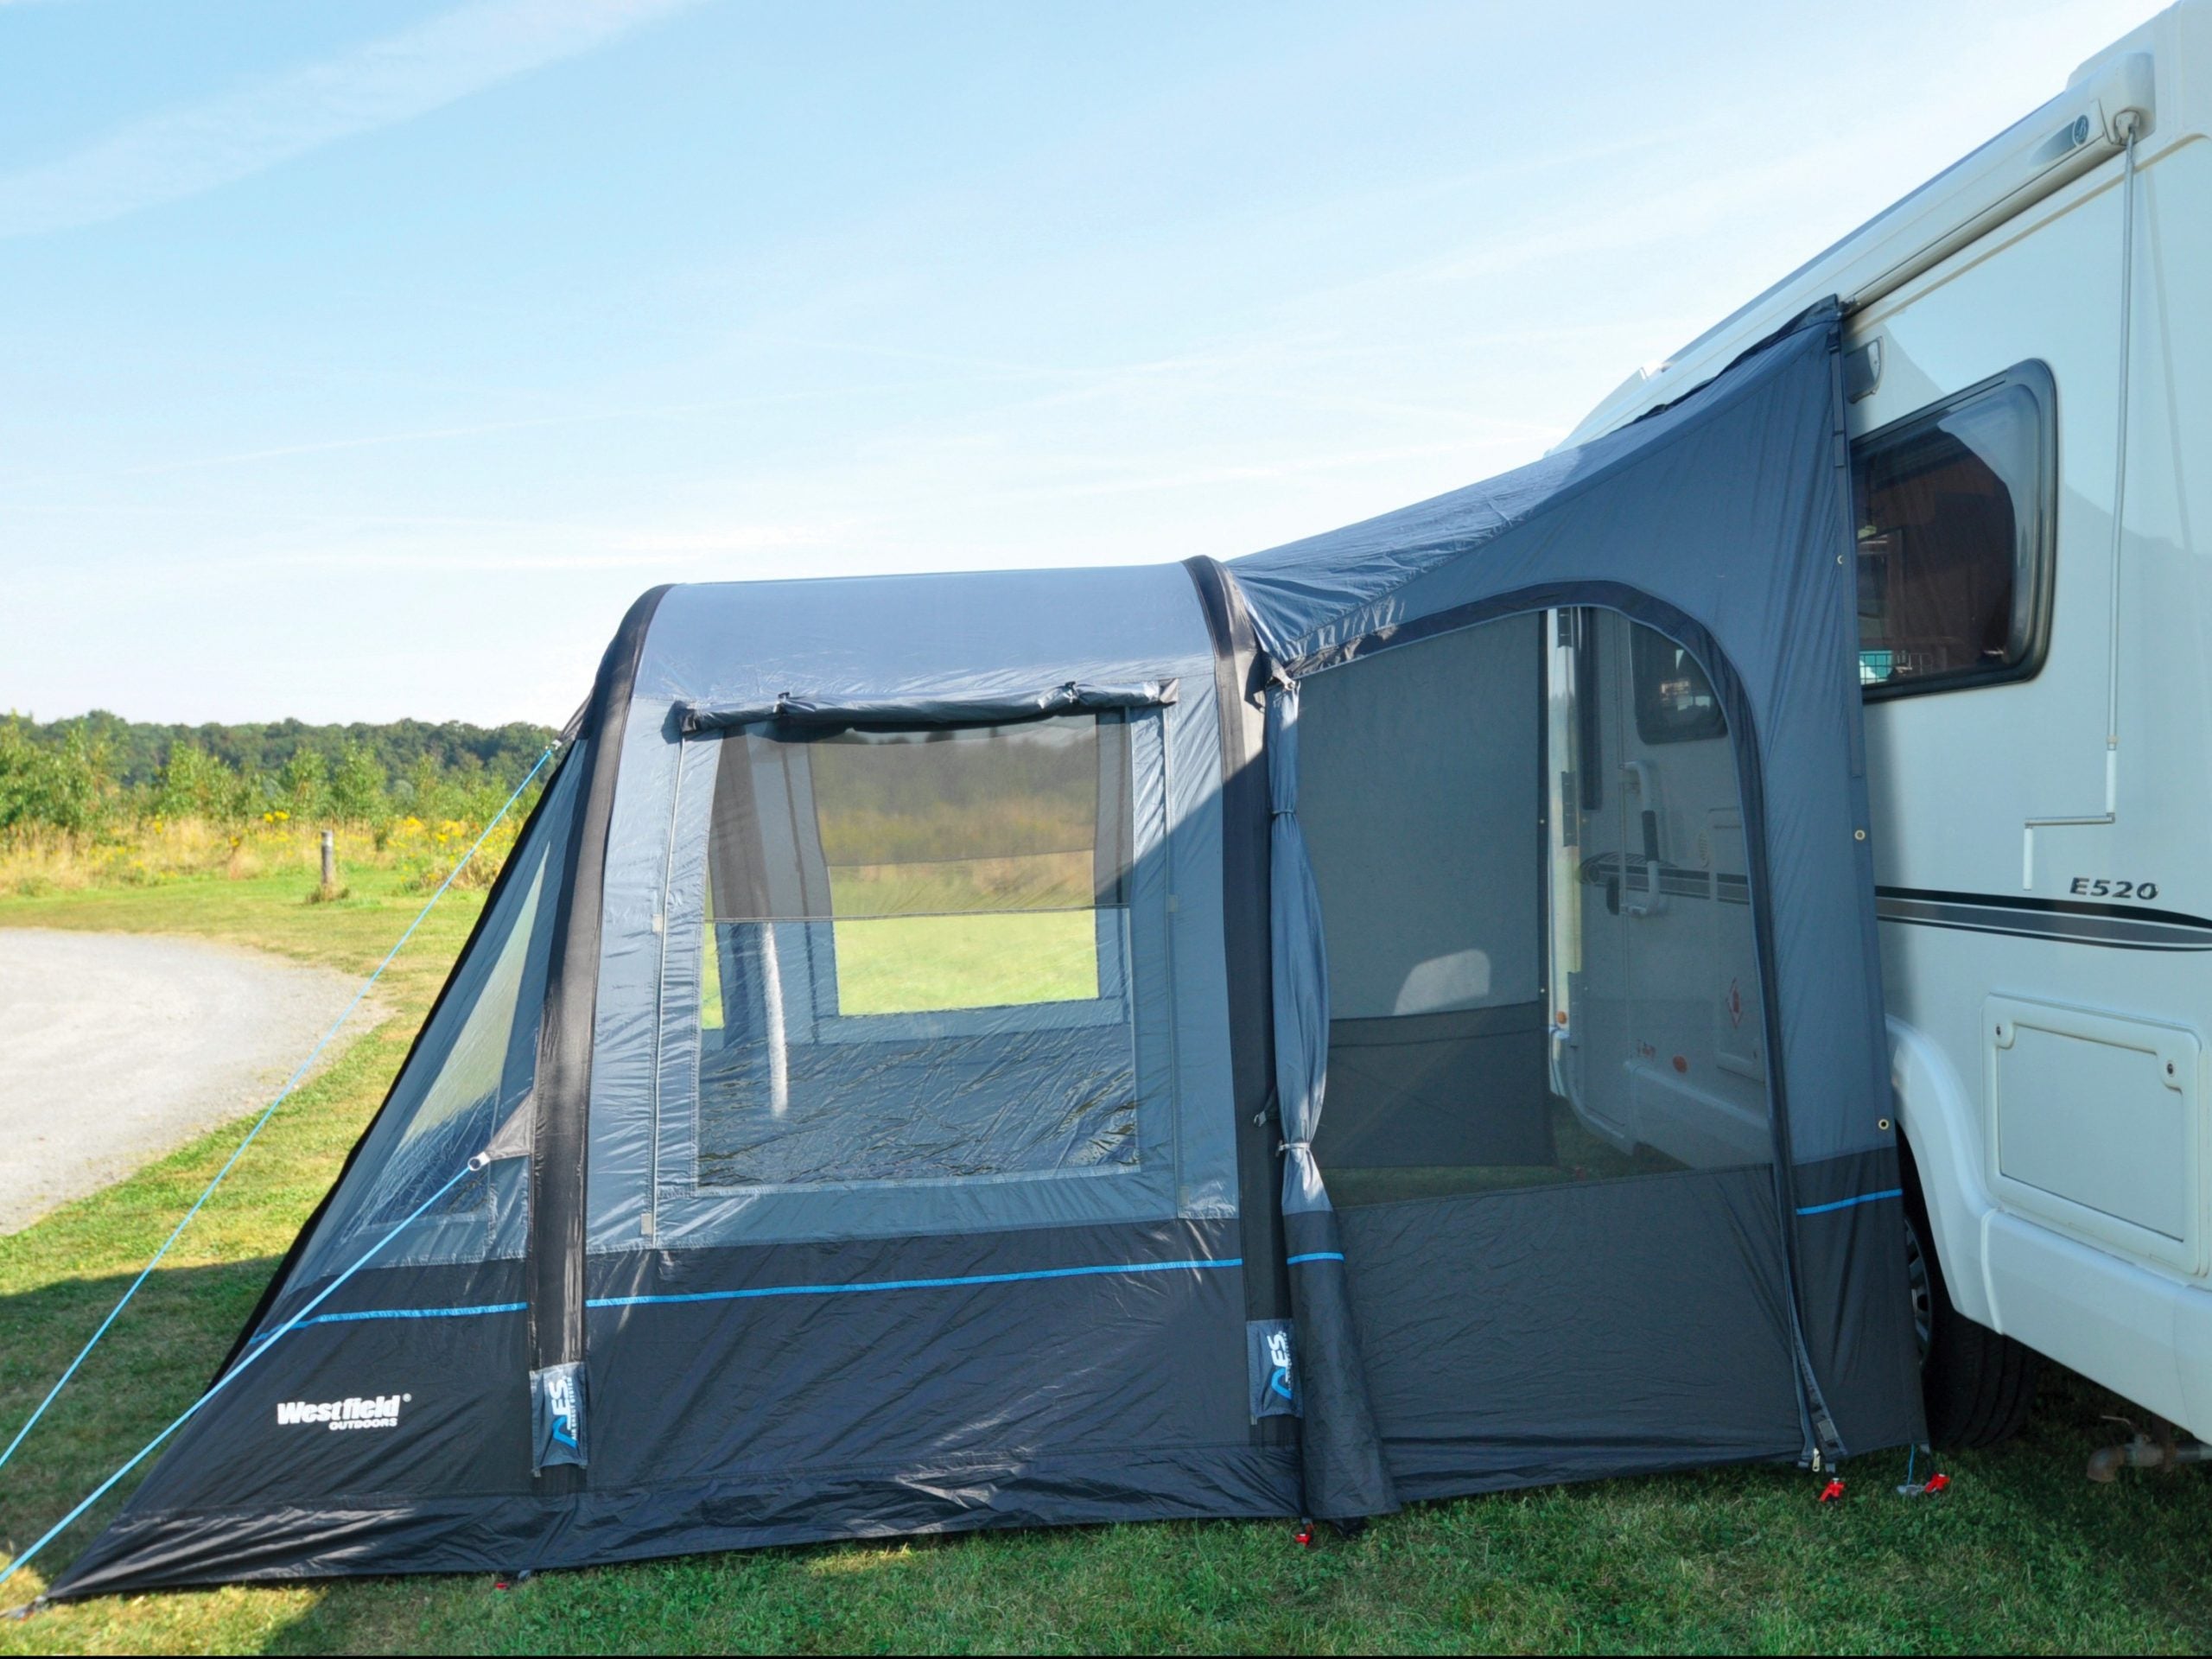 Quest Hydra 300 Smart Drive Away AIR Awning